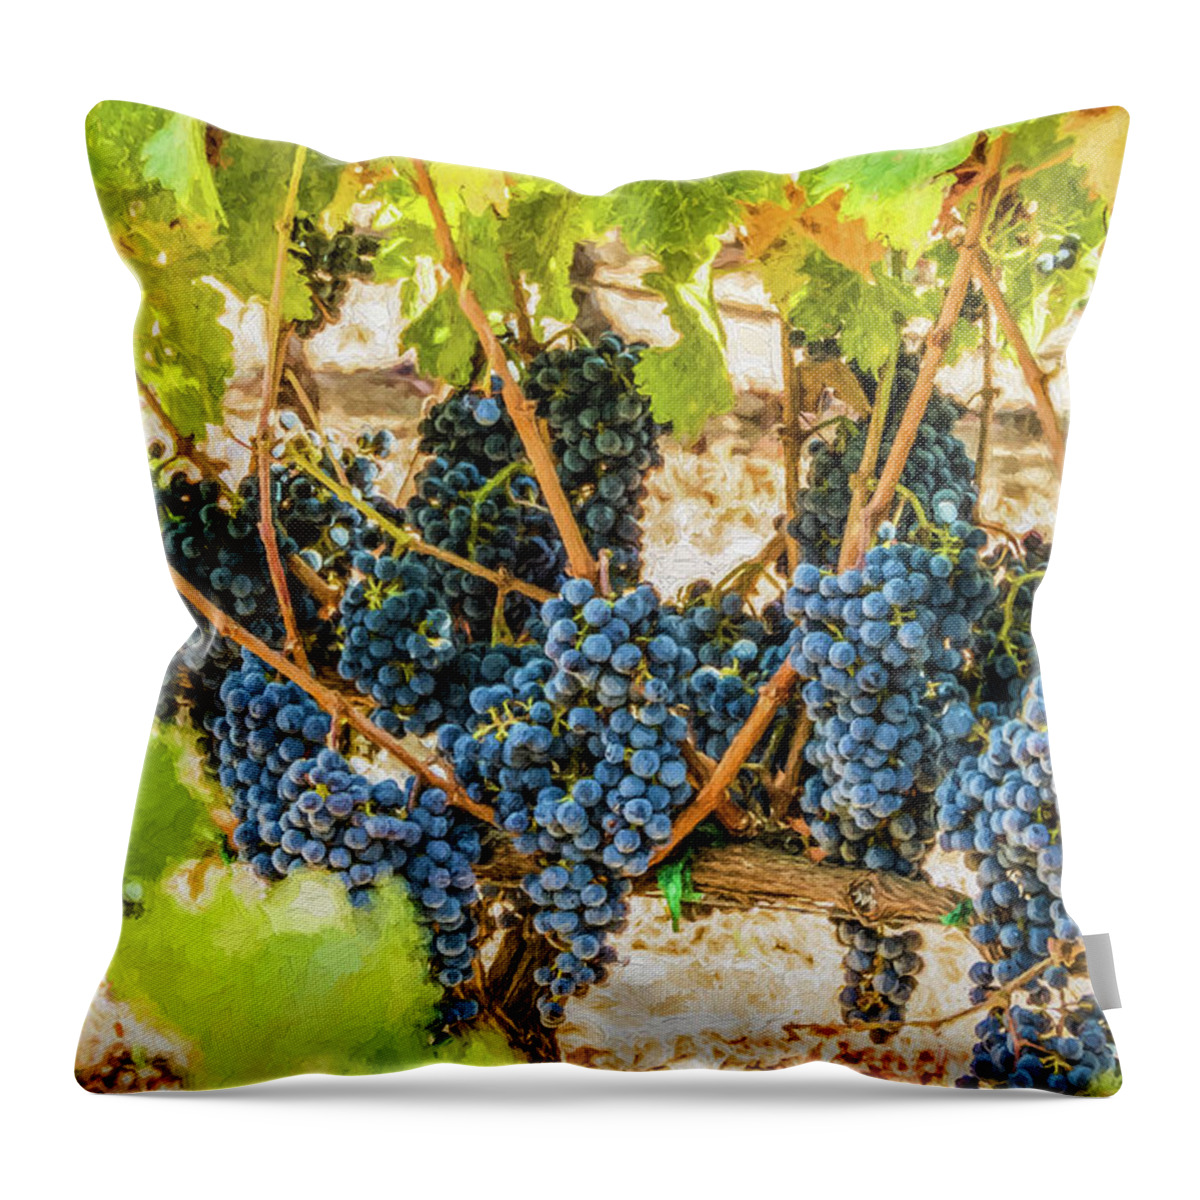 California Throw Pillow featuring the photograph Ripe Grapes on Vine by David Letts